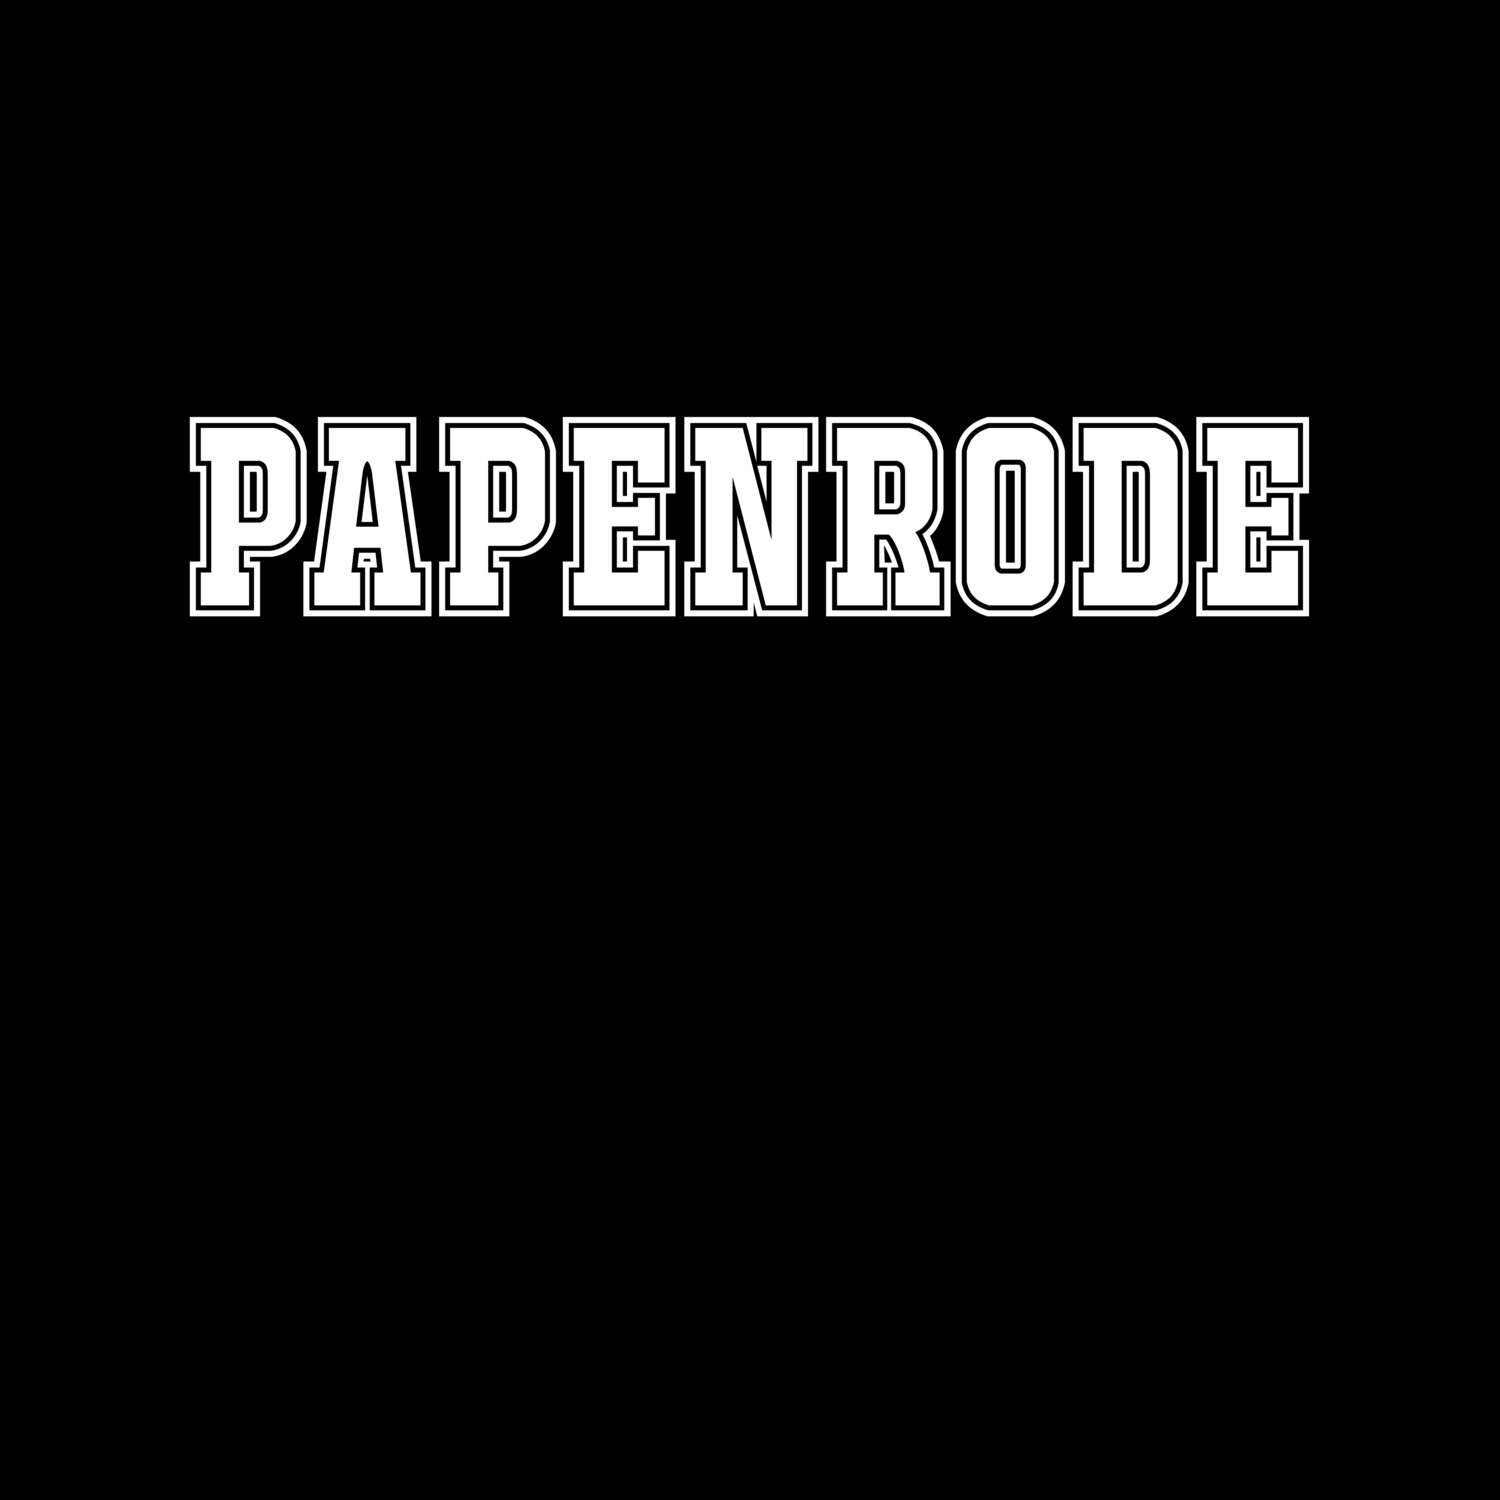 Papenrode T-Shirt »Classic«